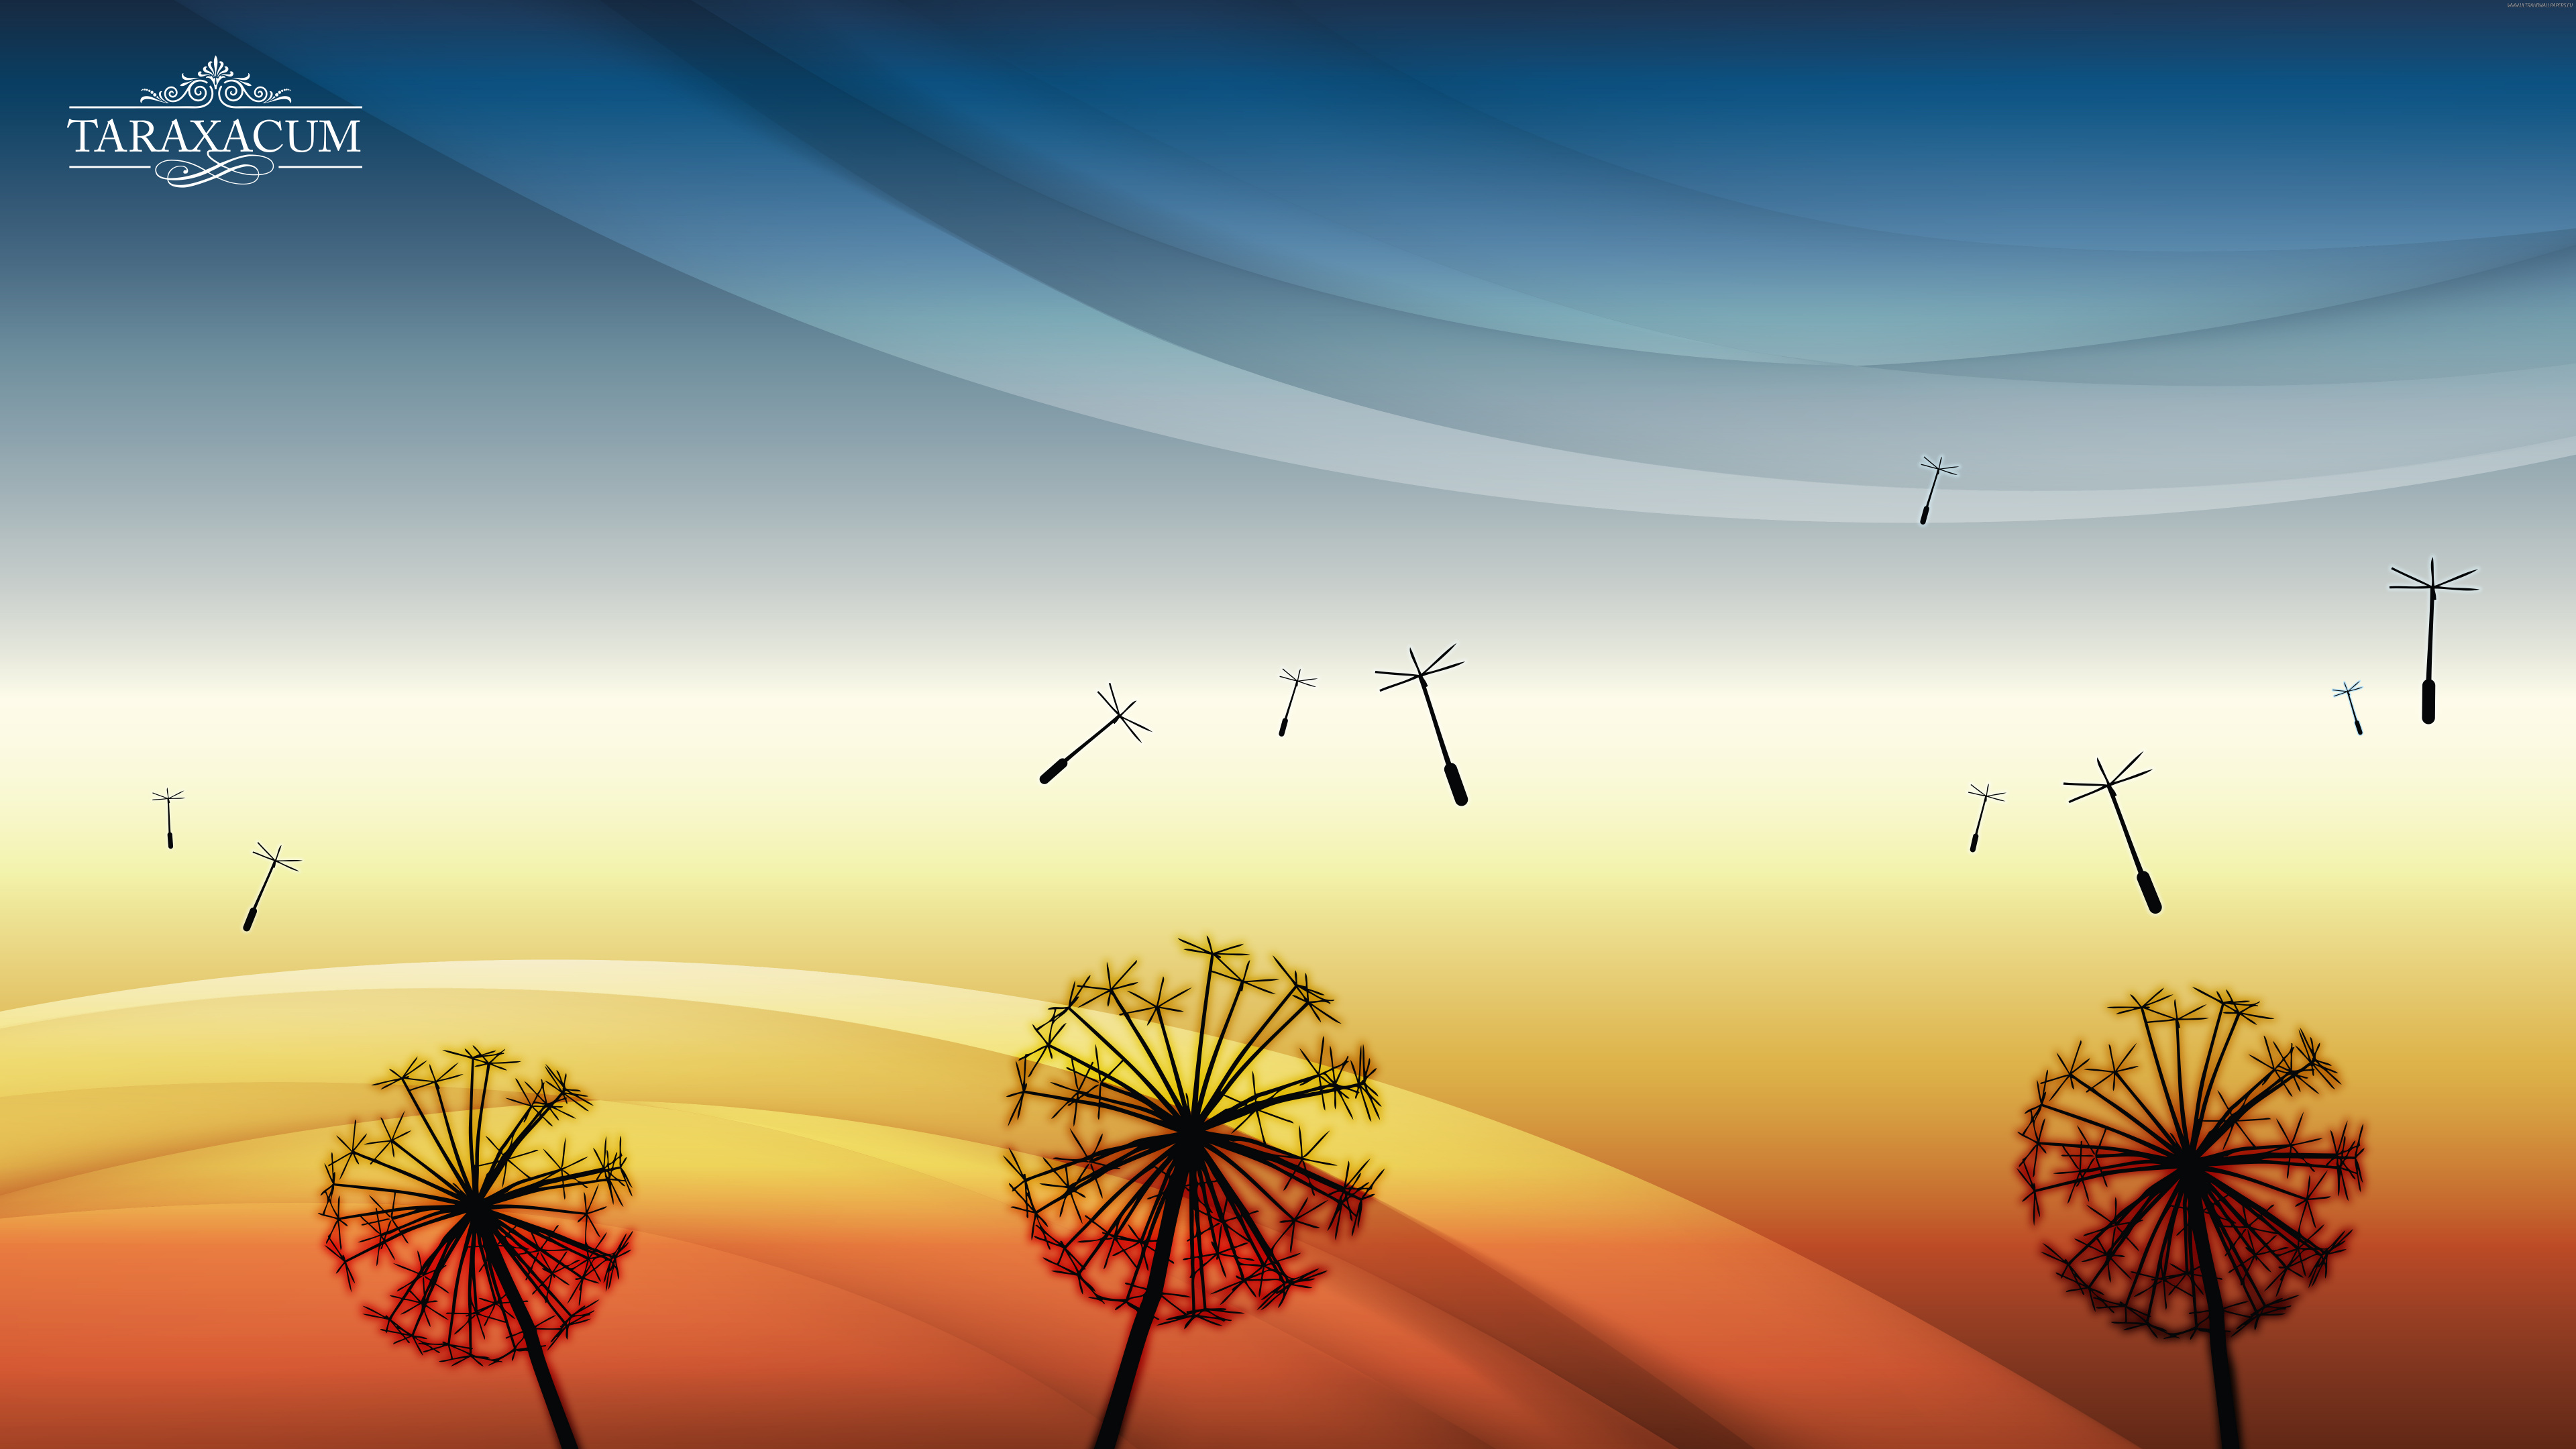 Silhouette of Birds Flying Over The Sky During Sunset. Wallpaper in 3840x2160 Resolution